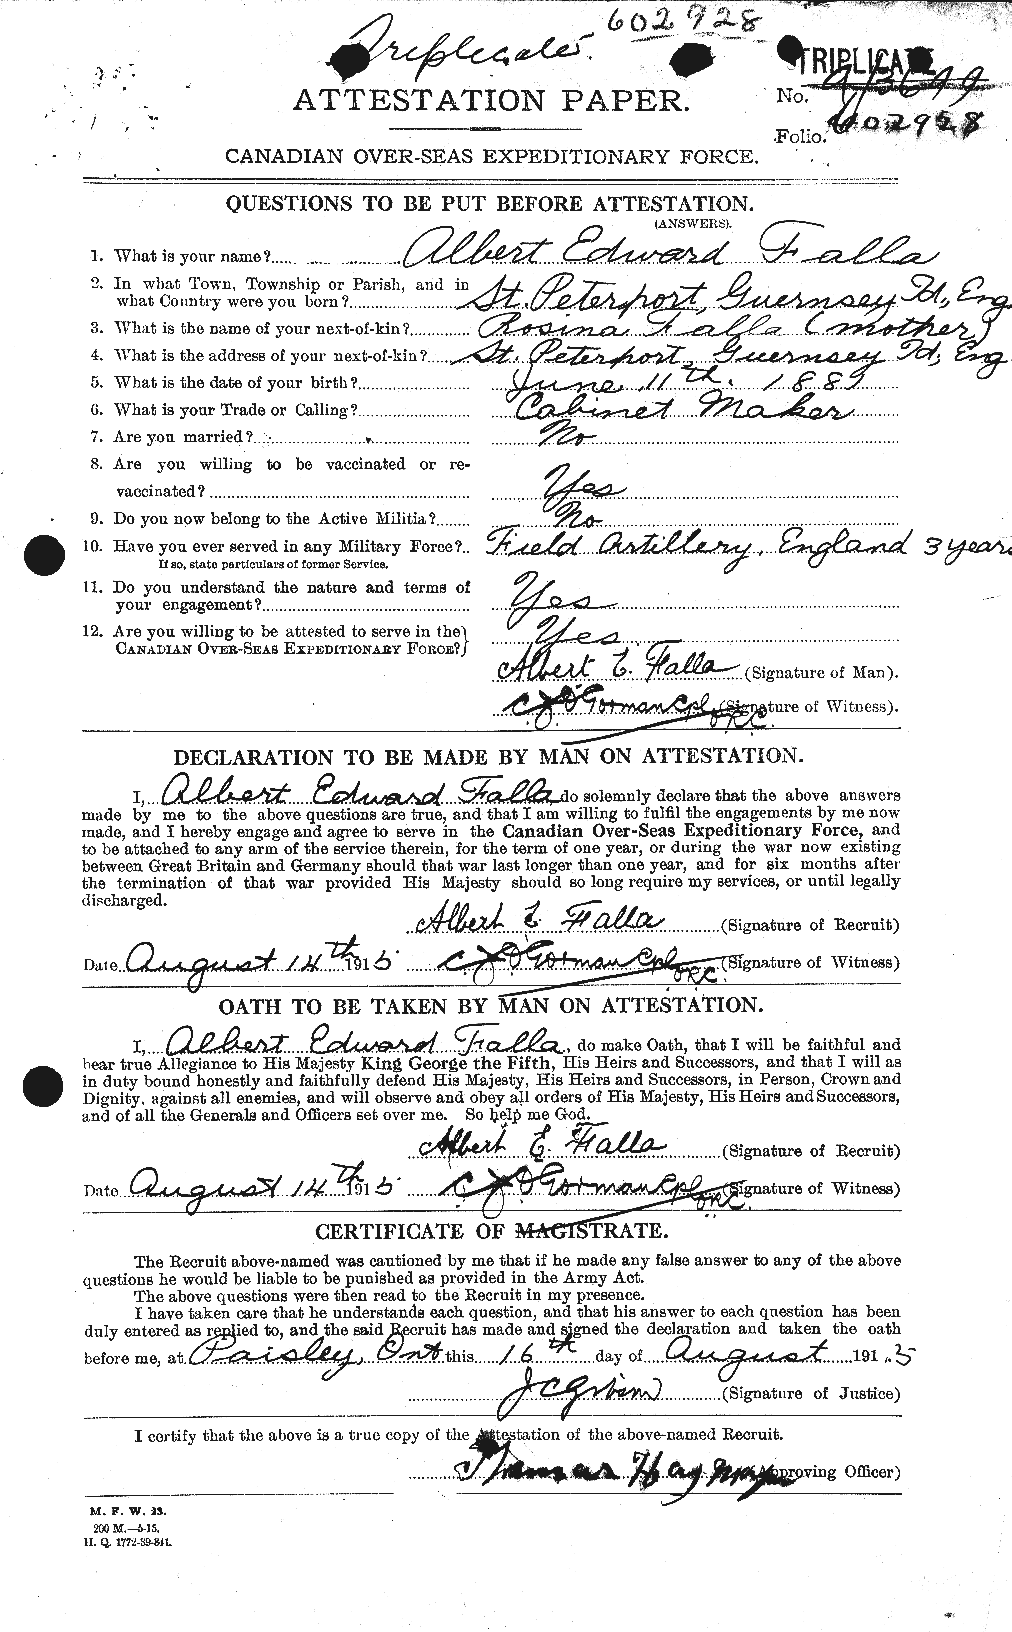 Personnel Records of the First World War - CEF 317091a